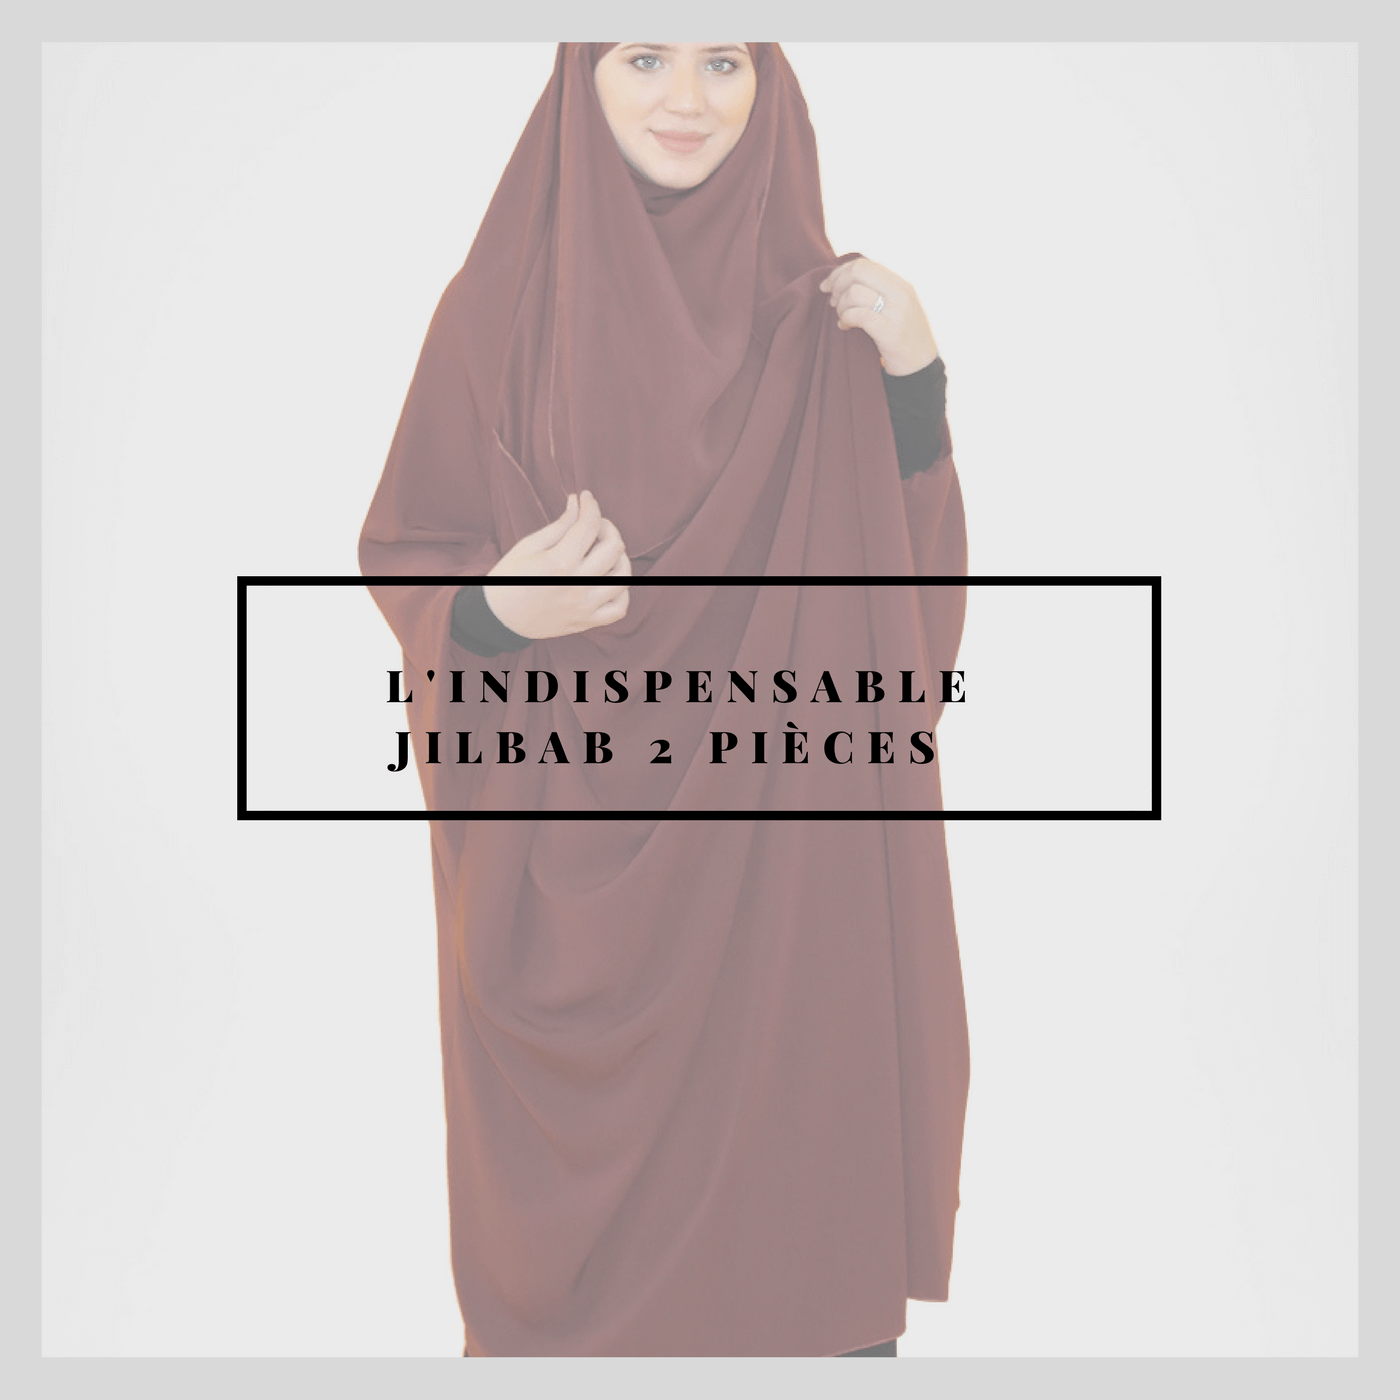 INDISPENSABLE%20JILBAB%202%20PIECES.png